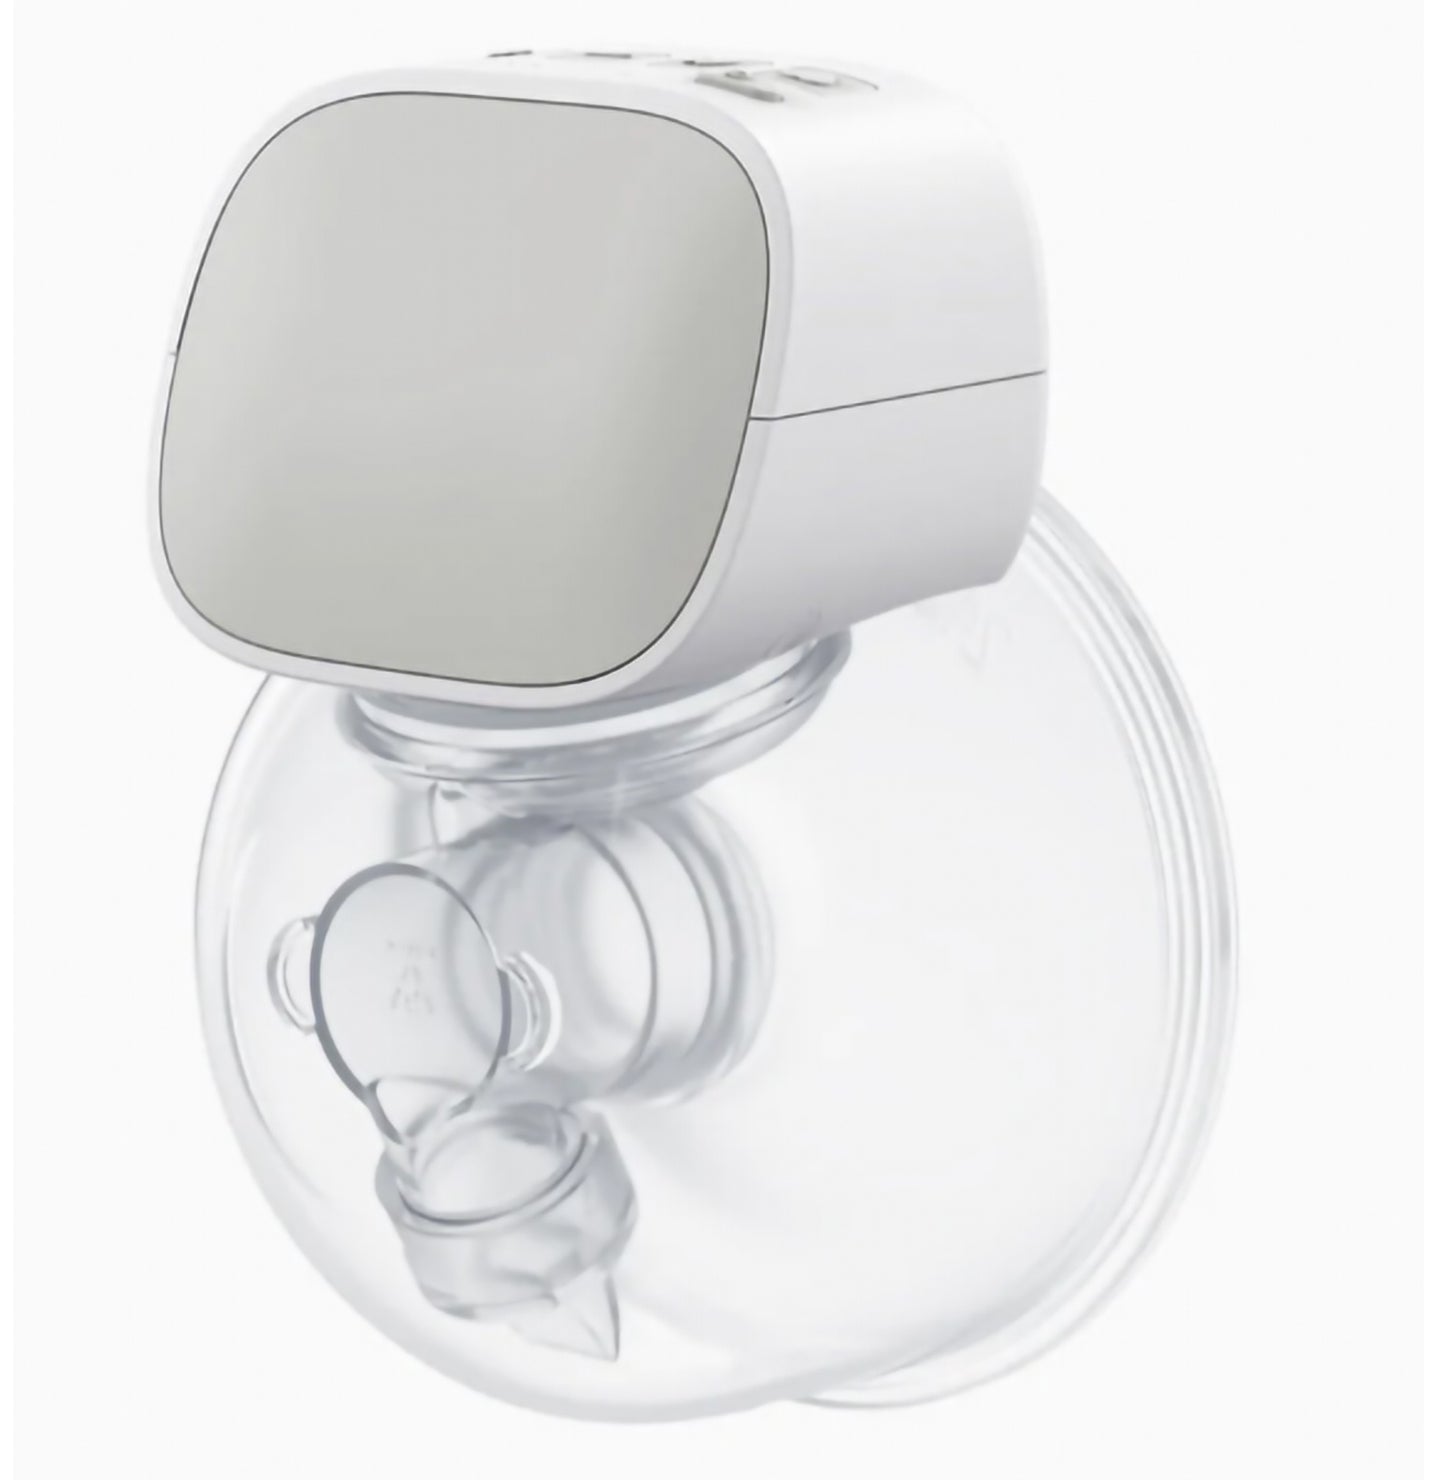 Mamomy S9 Double Wearable Breast Pump, Hands-Free Breast Pump, Portable Electric Breast Pump with 2 Mode & 5 Levels